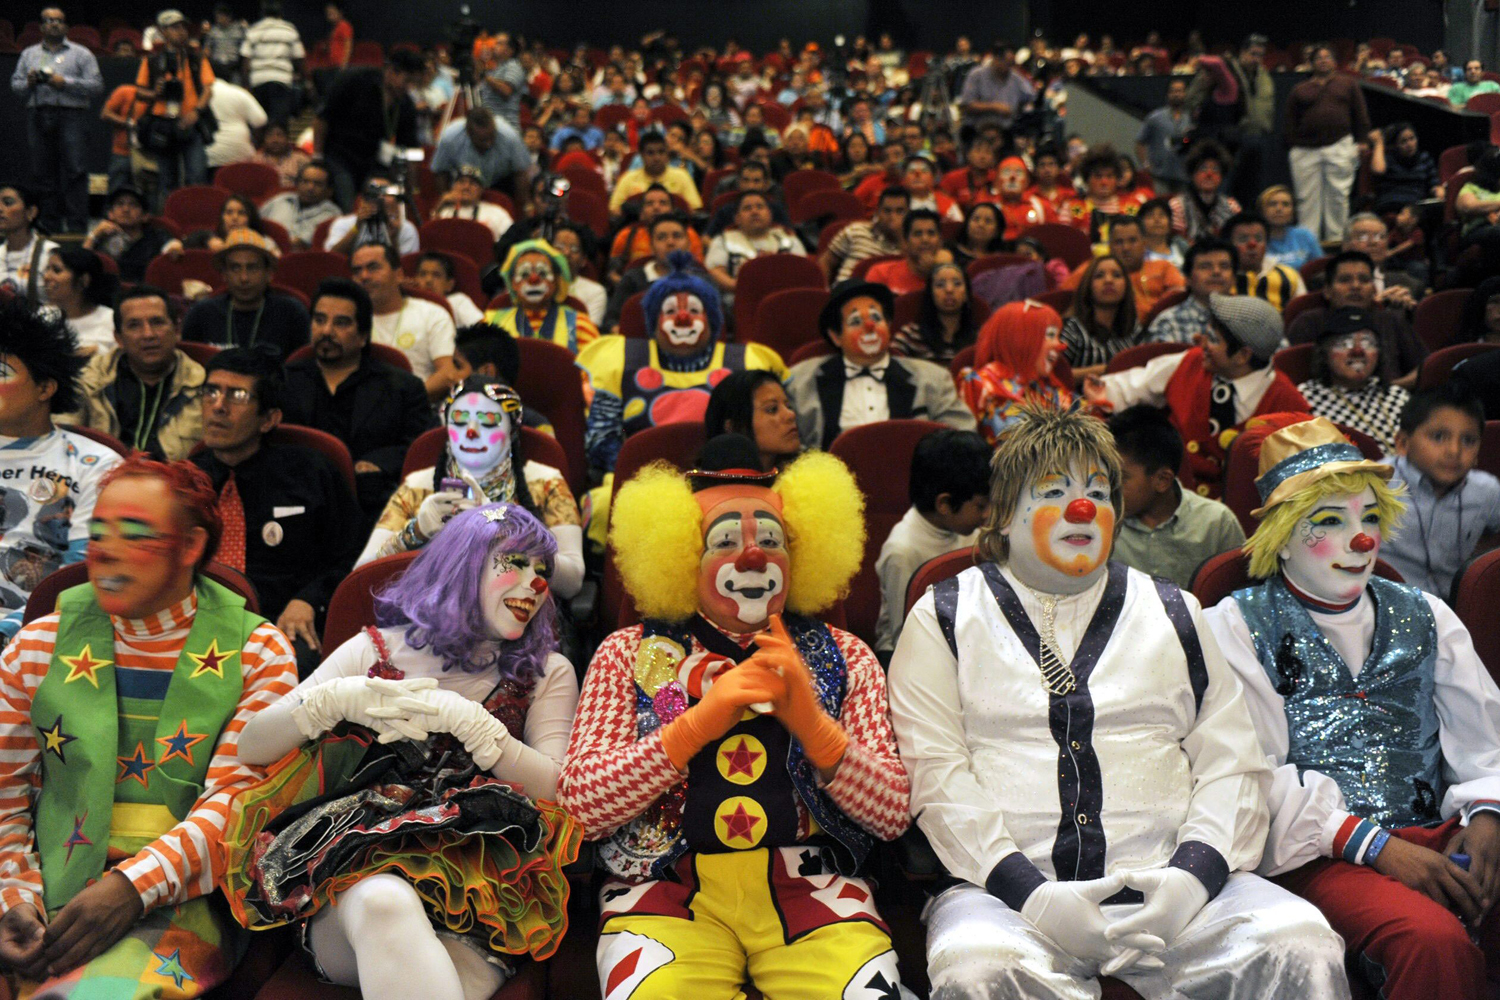 Image: Oct. 22, 2012. Dozens of clowns from Peru, El Salvador, Honduras, Dominican Republic, Guatemala, Belize, Nicaragua, US and Mexico attend the International Clown Convention 2012 in Mexico City.